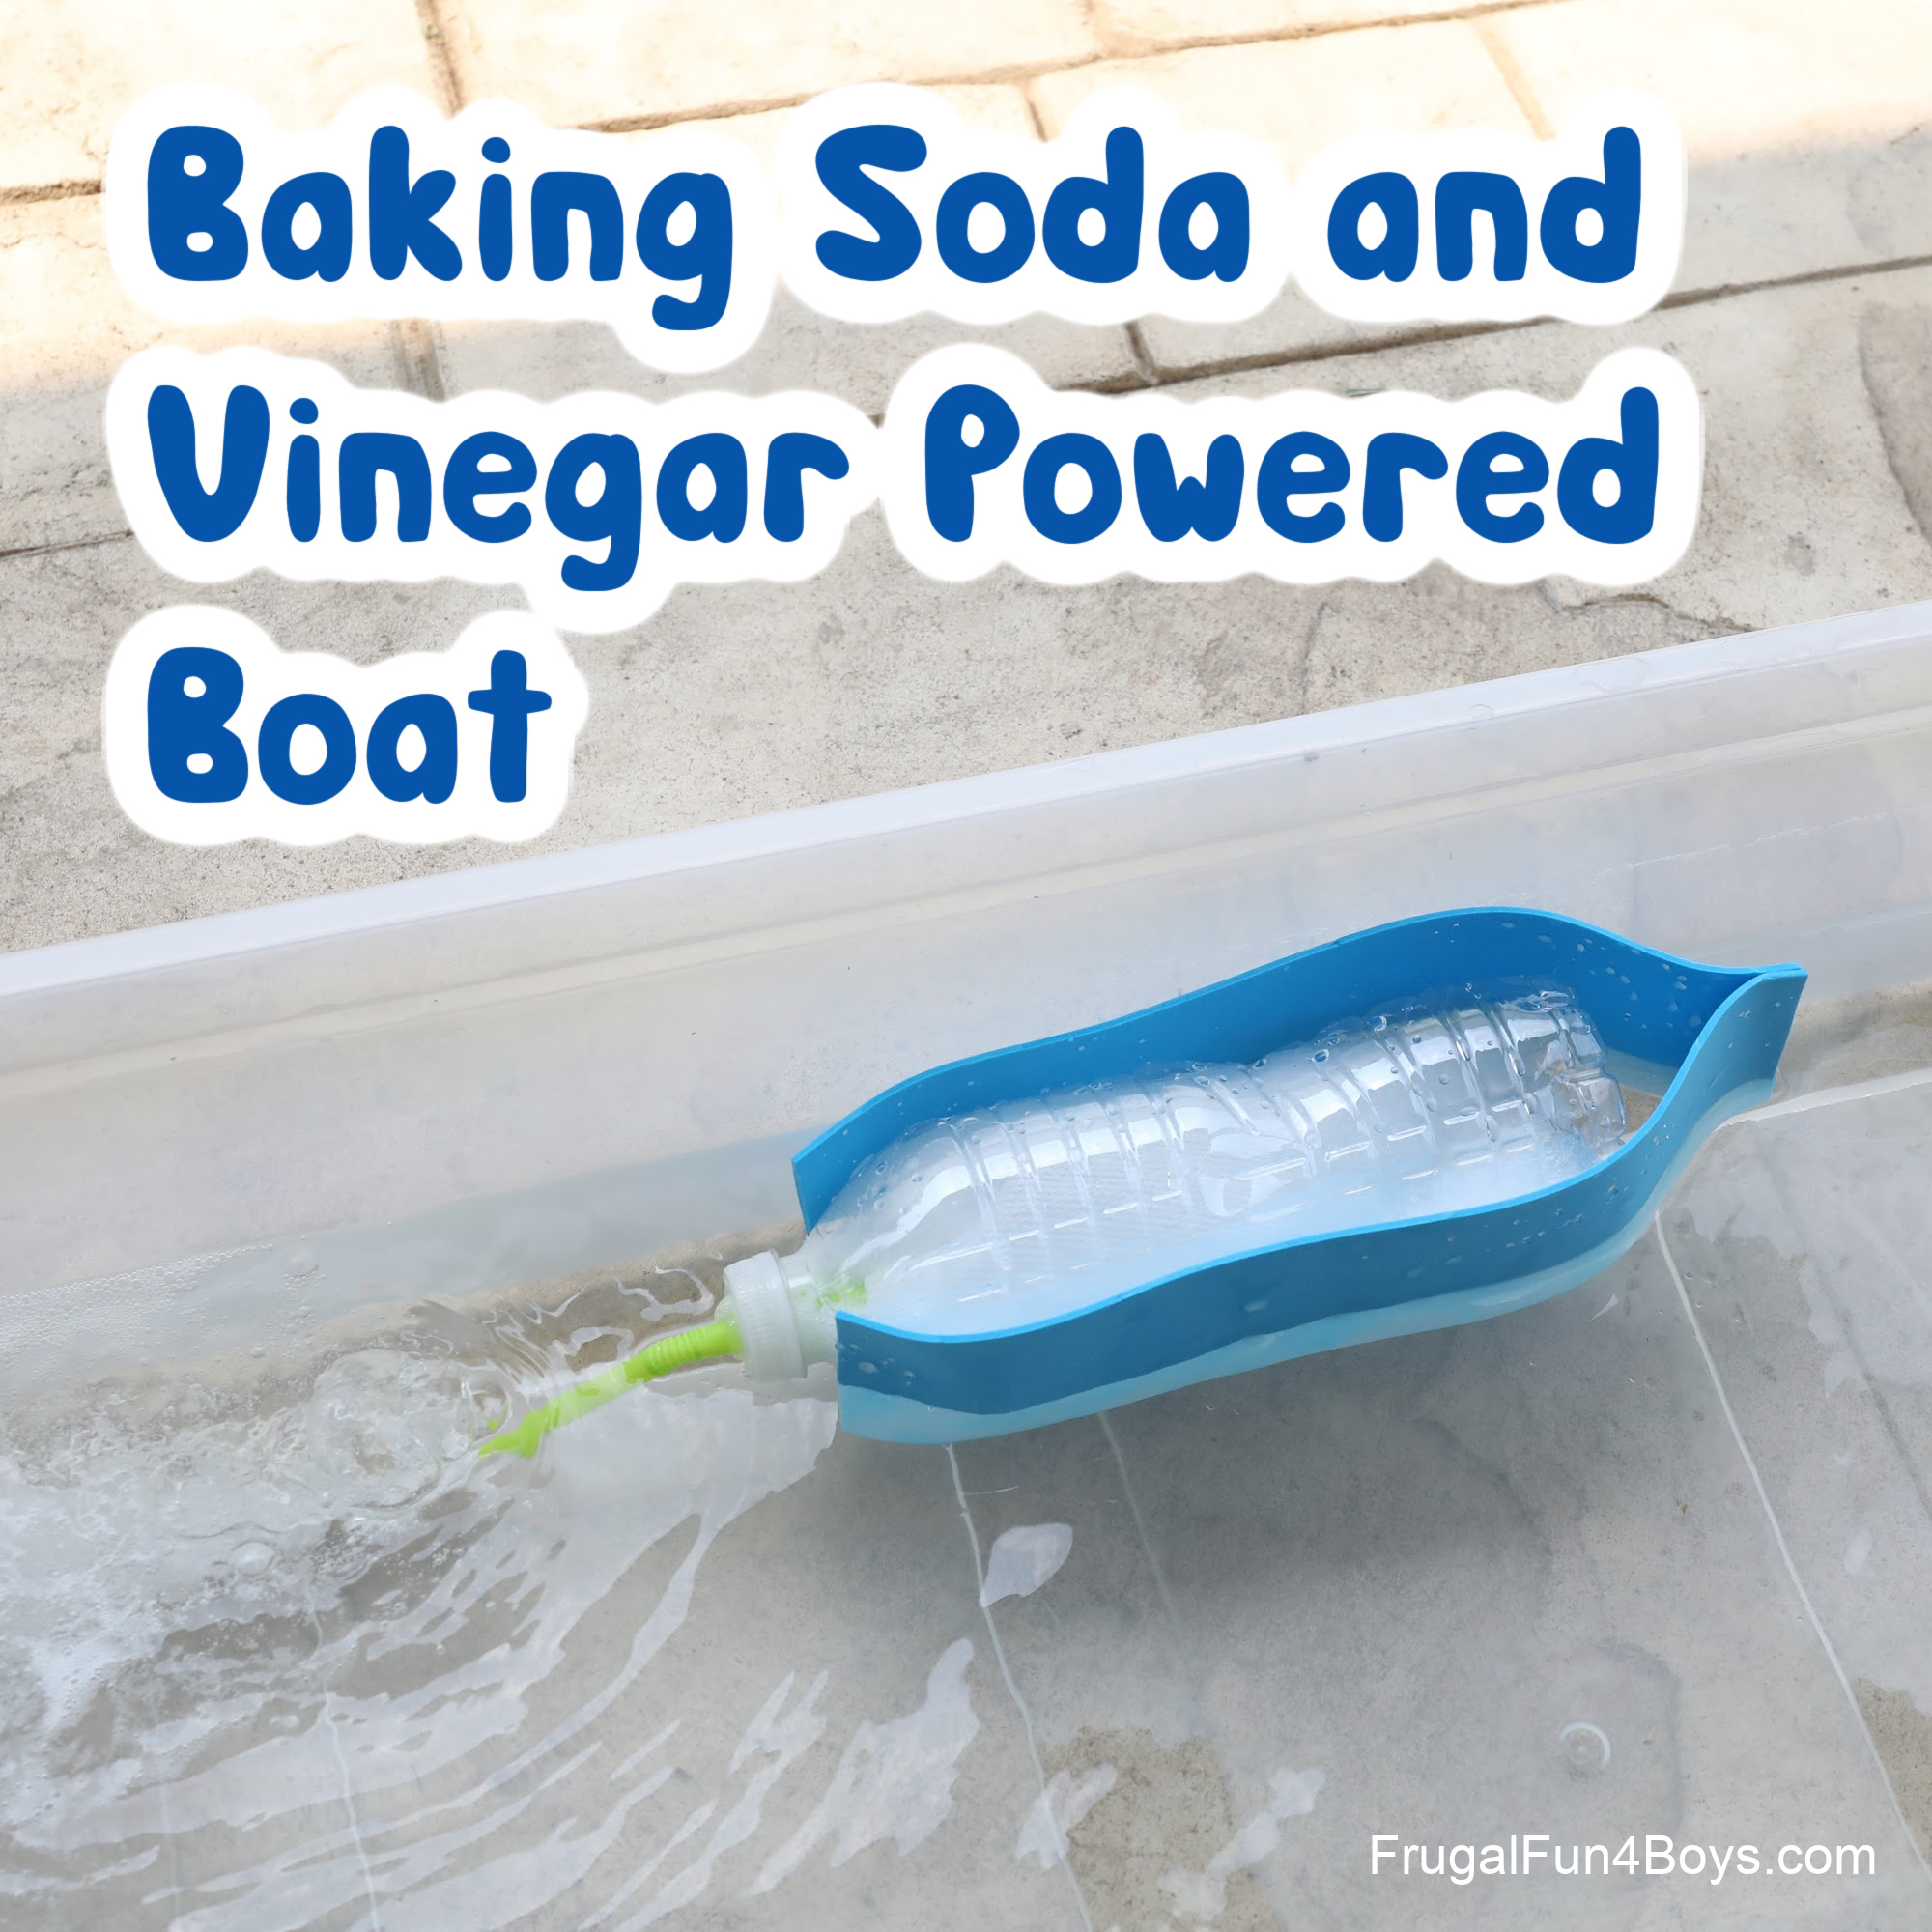 Baking soda and vinegar powered boat science experiment